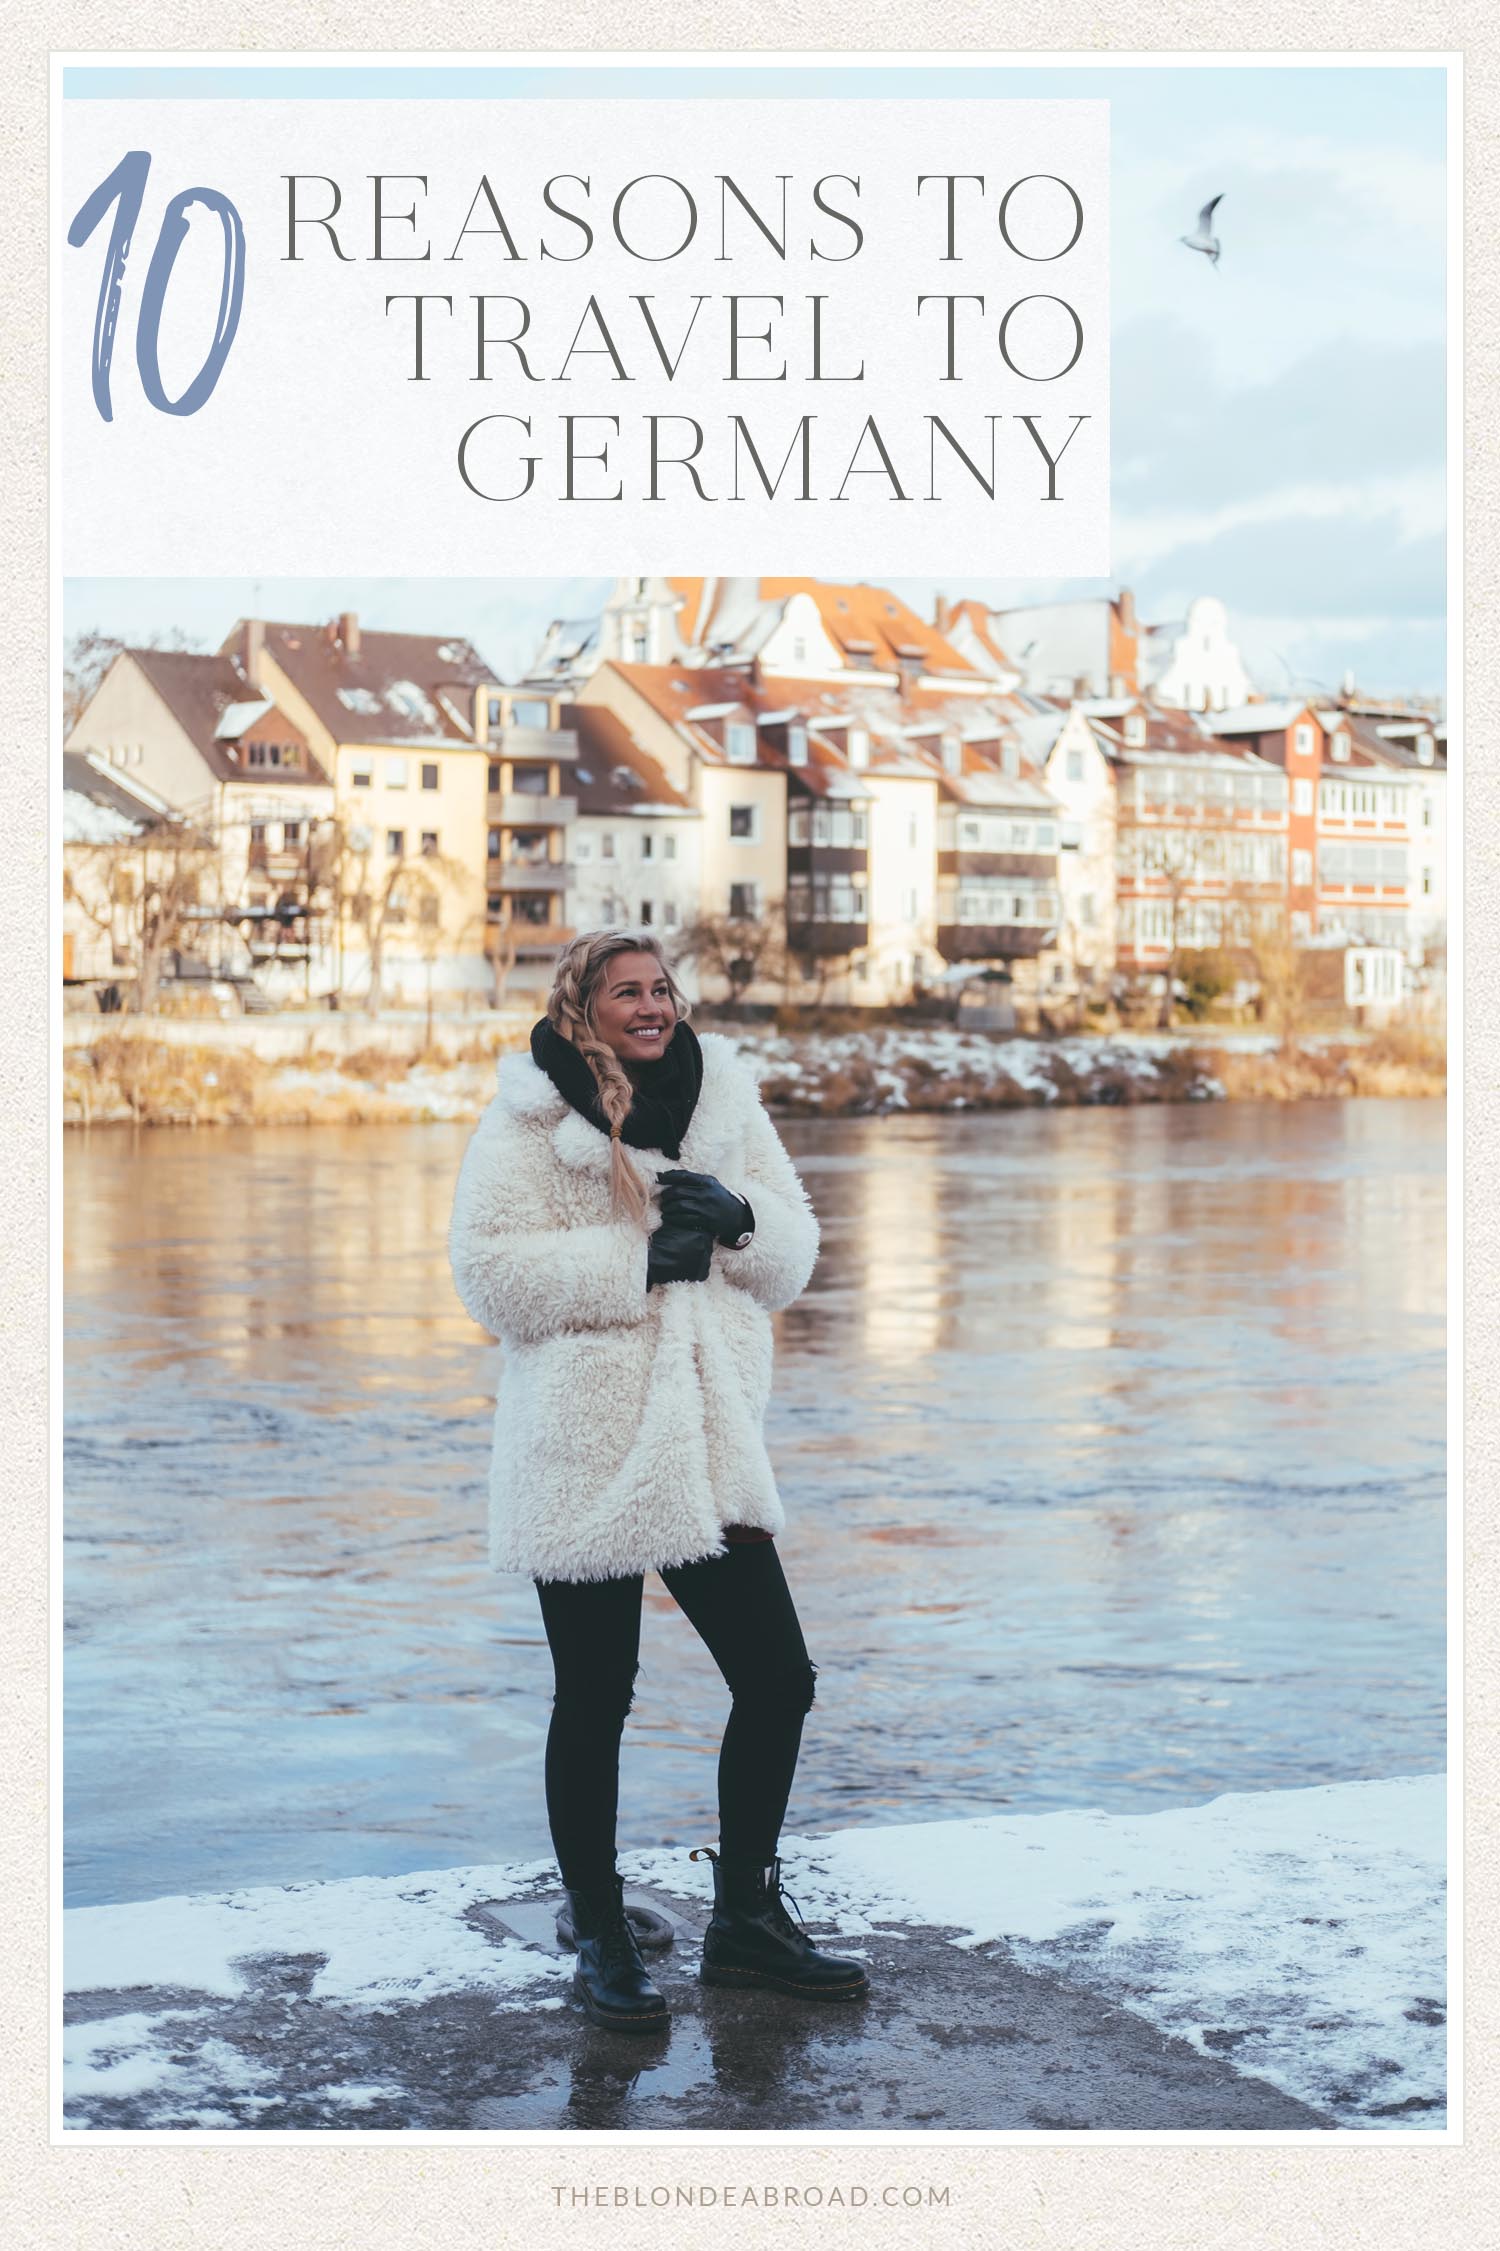 10 Reasons to Travel to Germany